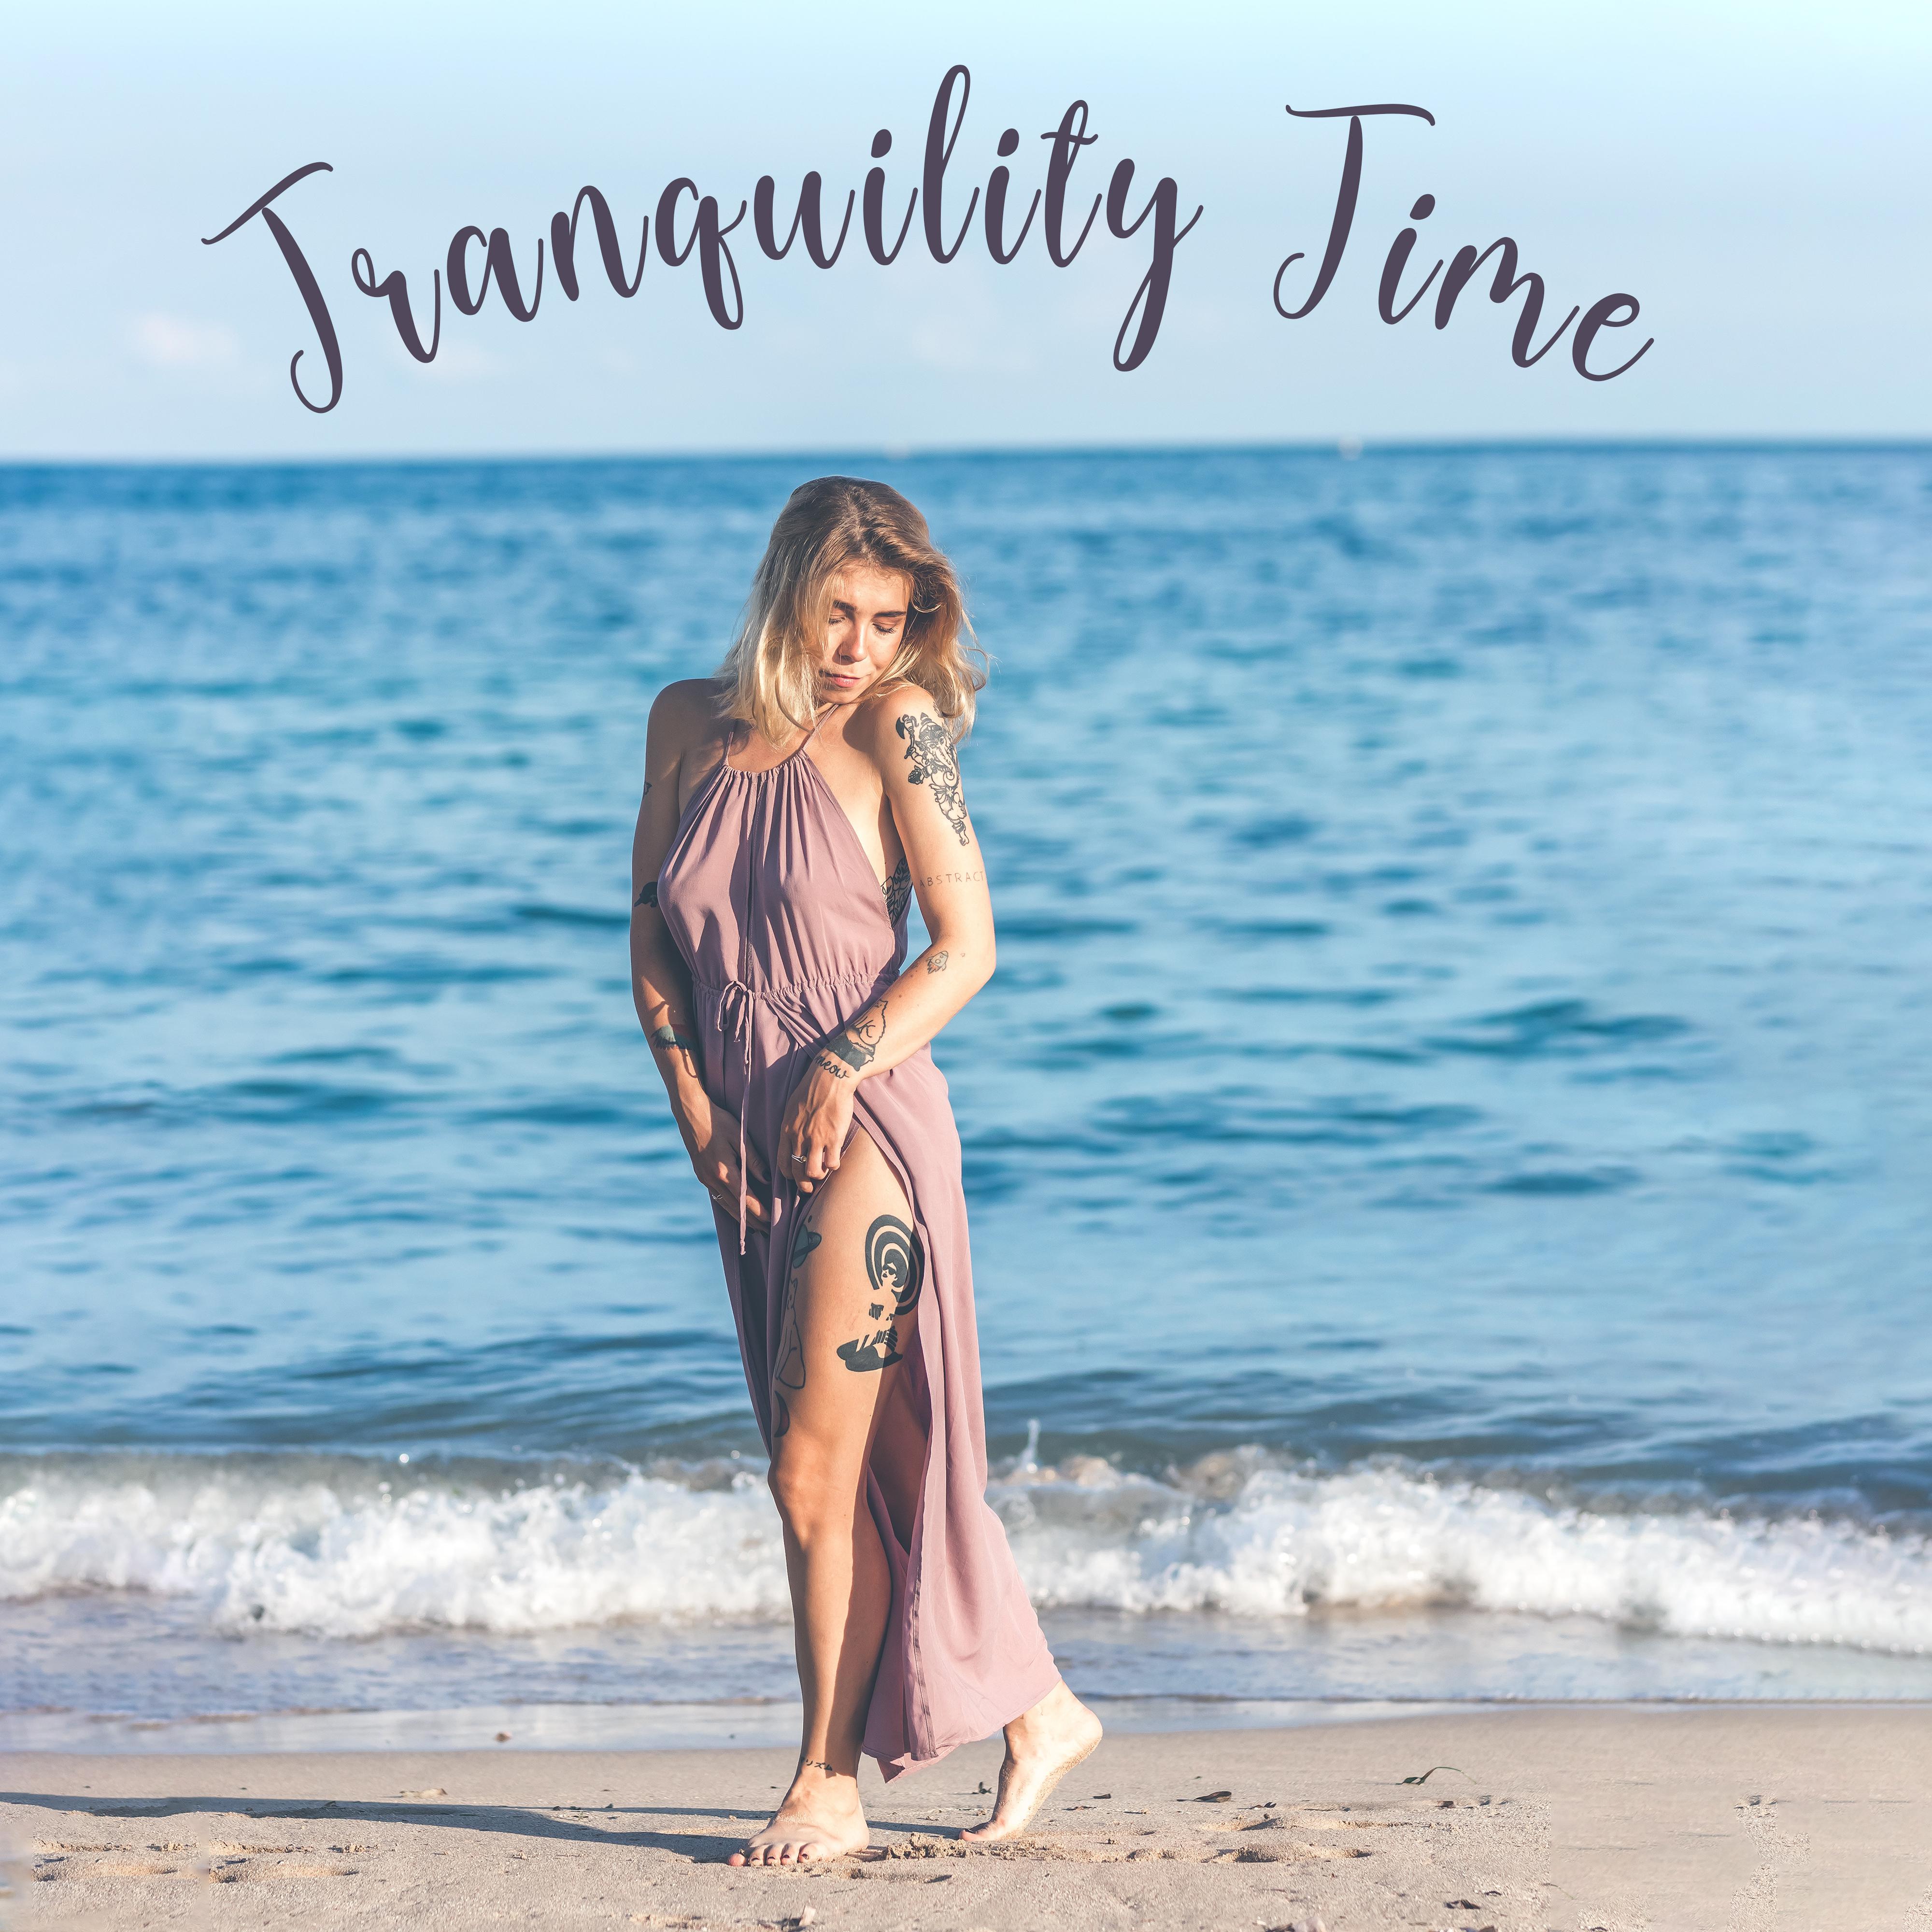 Tranquility Time: Music to Calm Down, De-stress, Calm Down Thoughts and Rest